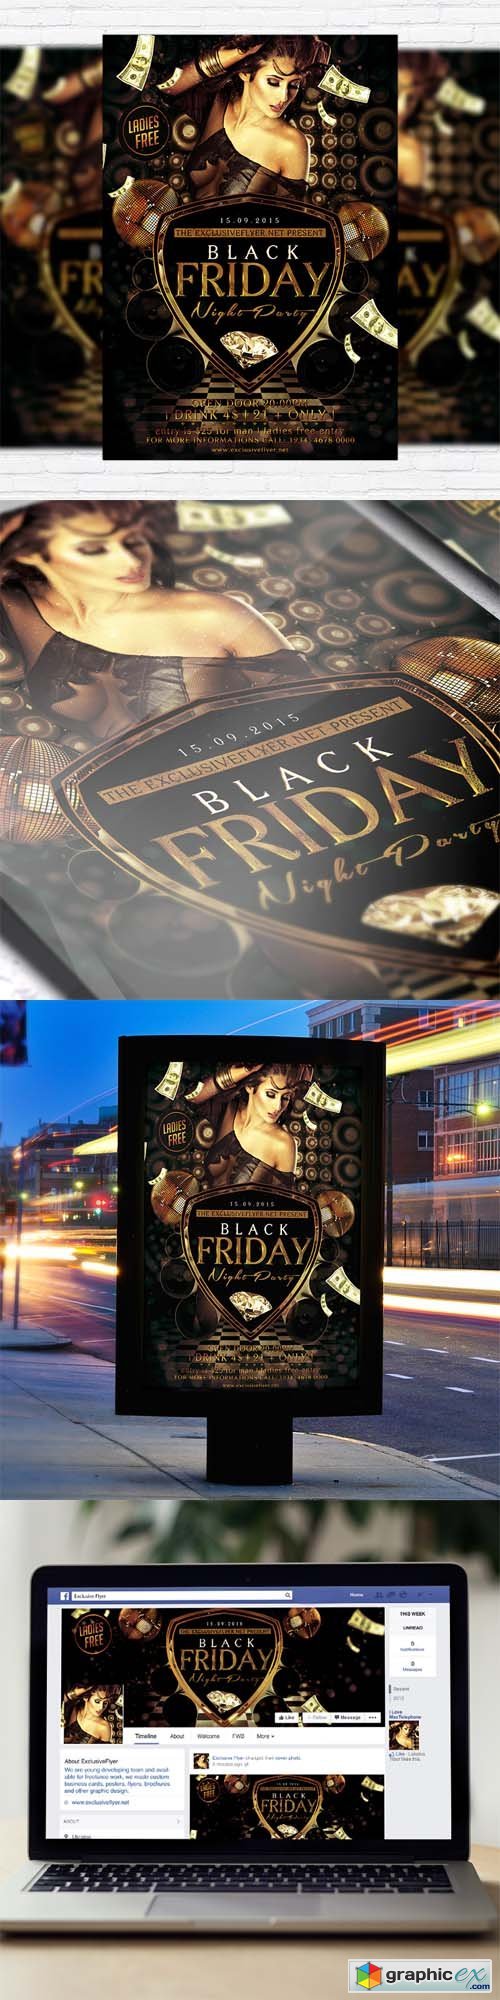 Black Friday - Flyer Template + Facebook Cover